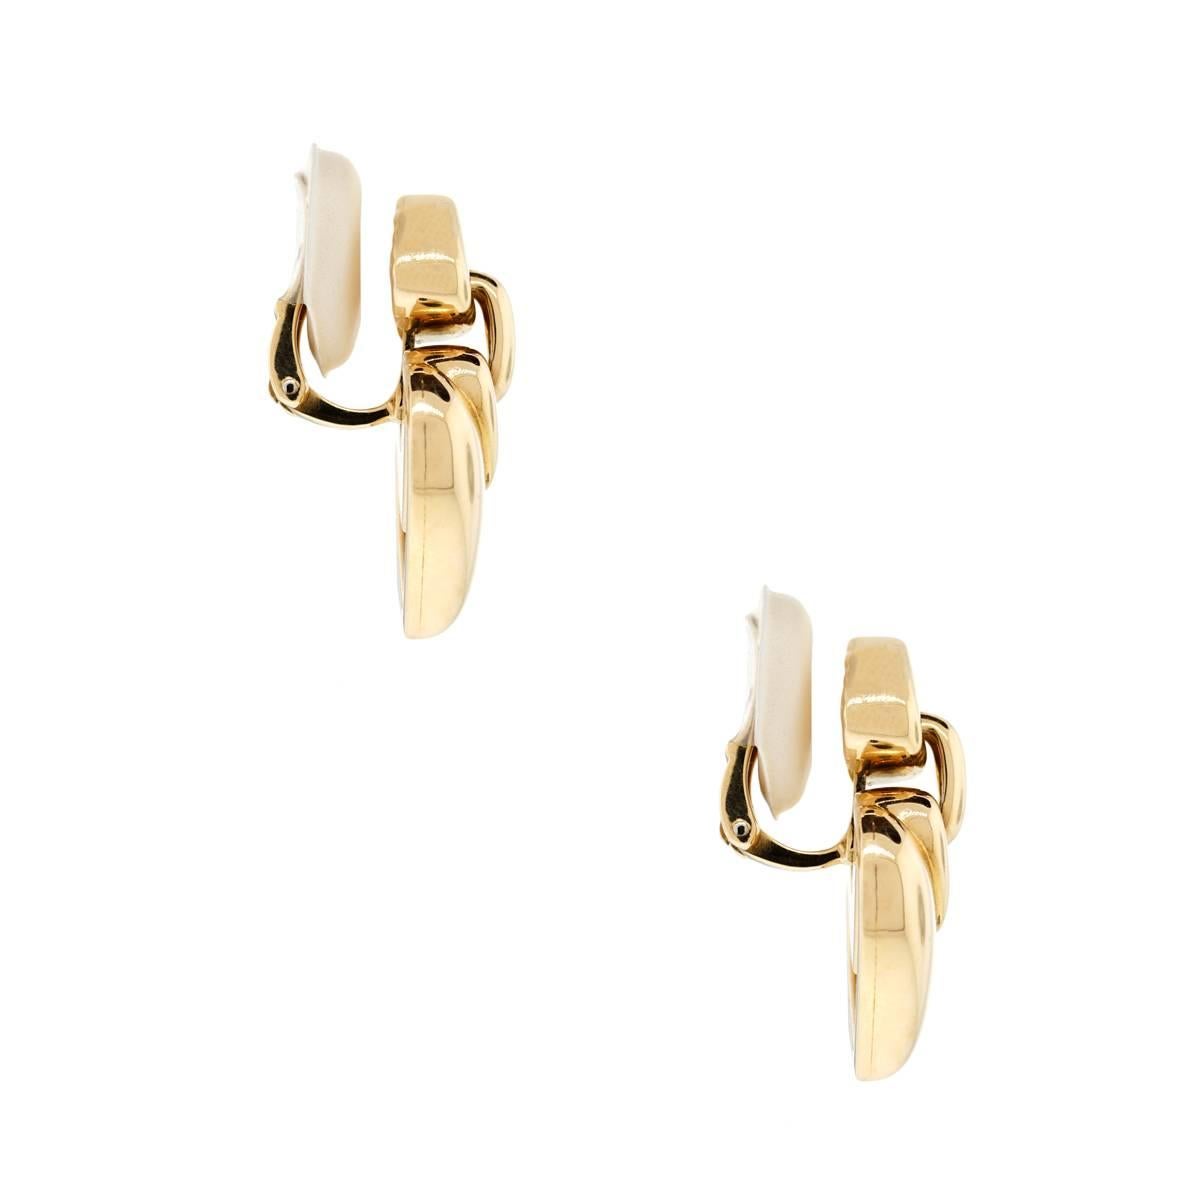 Material: 18k yellow gold
Style: Heart earrings
Earring Measurements: 1.4" x 0.8" x 0.6"
Total Weight: 31.2g (20.1dwt)
Clasp: Clip on
Additional Details: This item comes with a Raymond Lee Jewelers presentation box!
SKU: 11011169